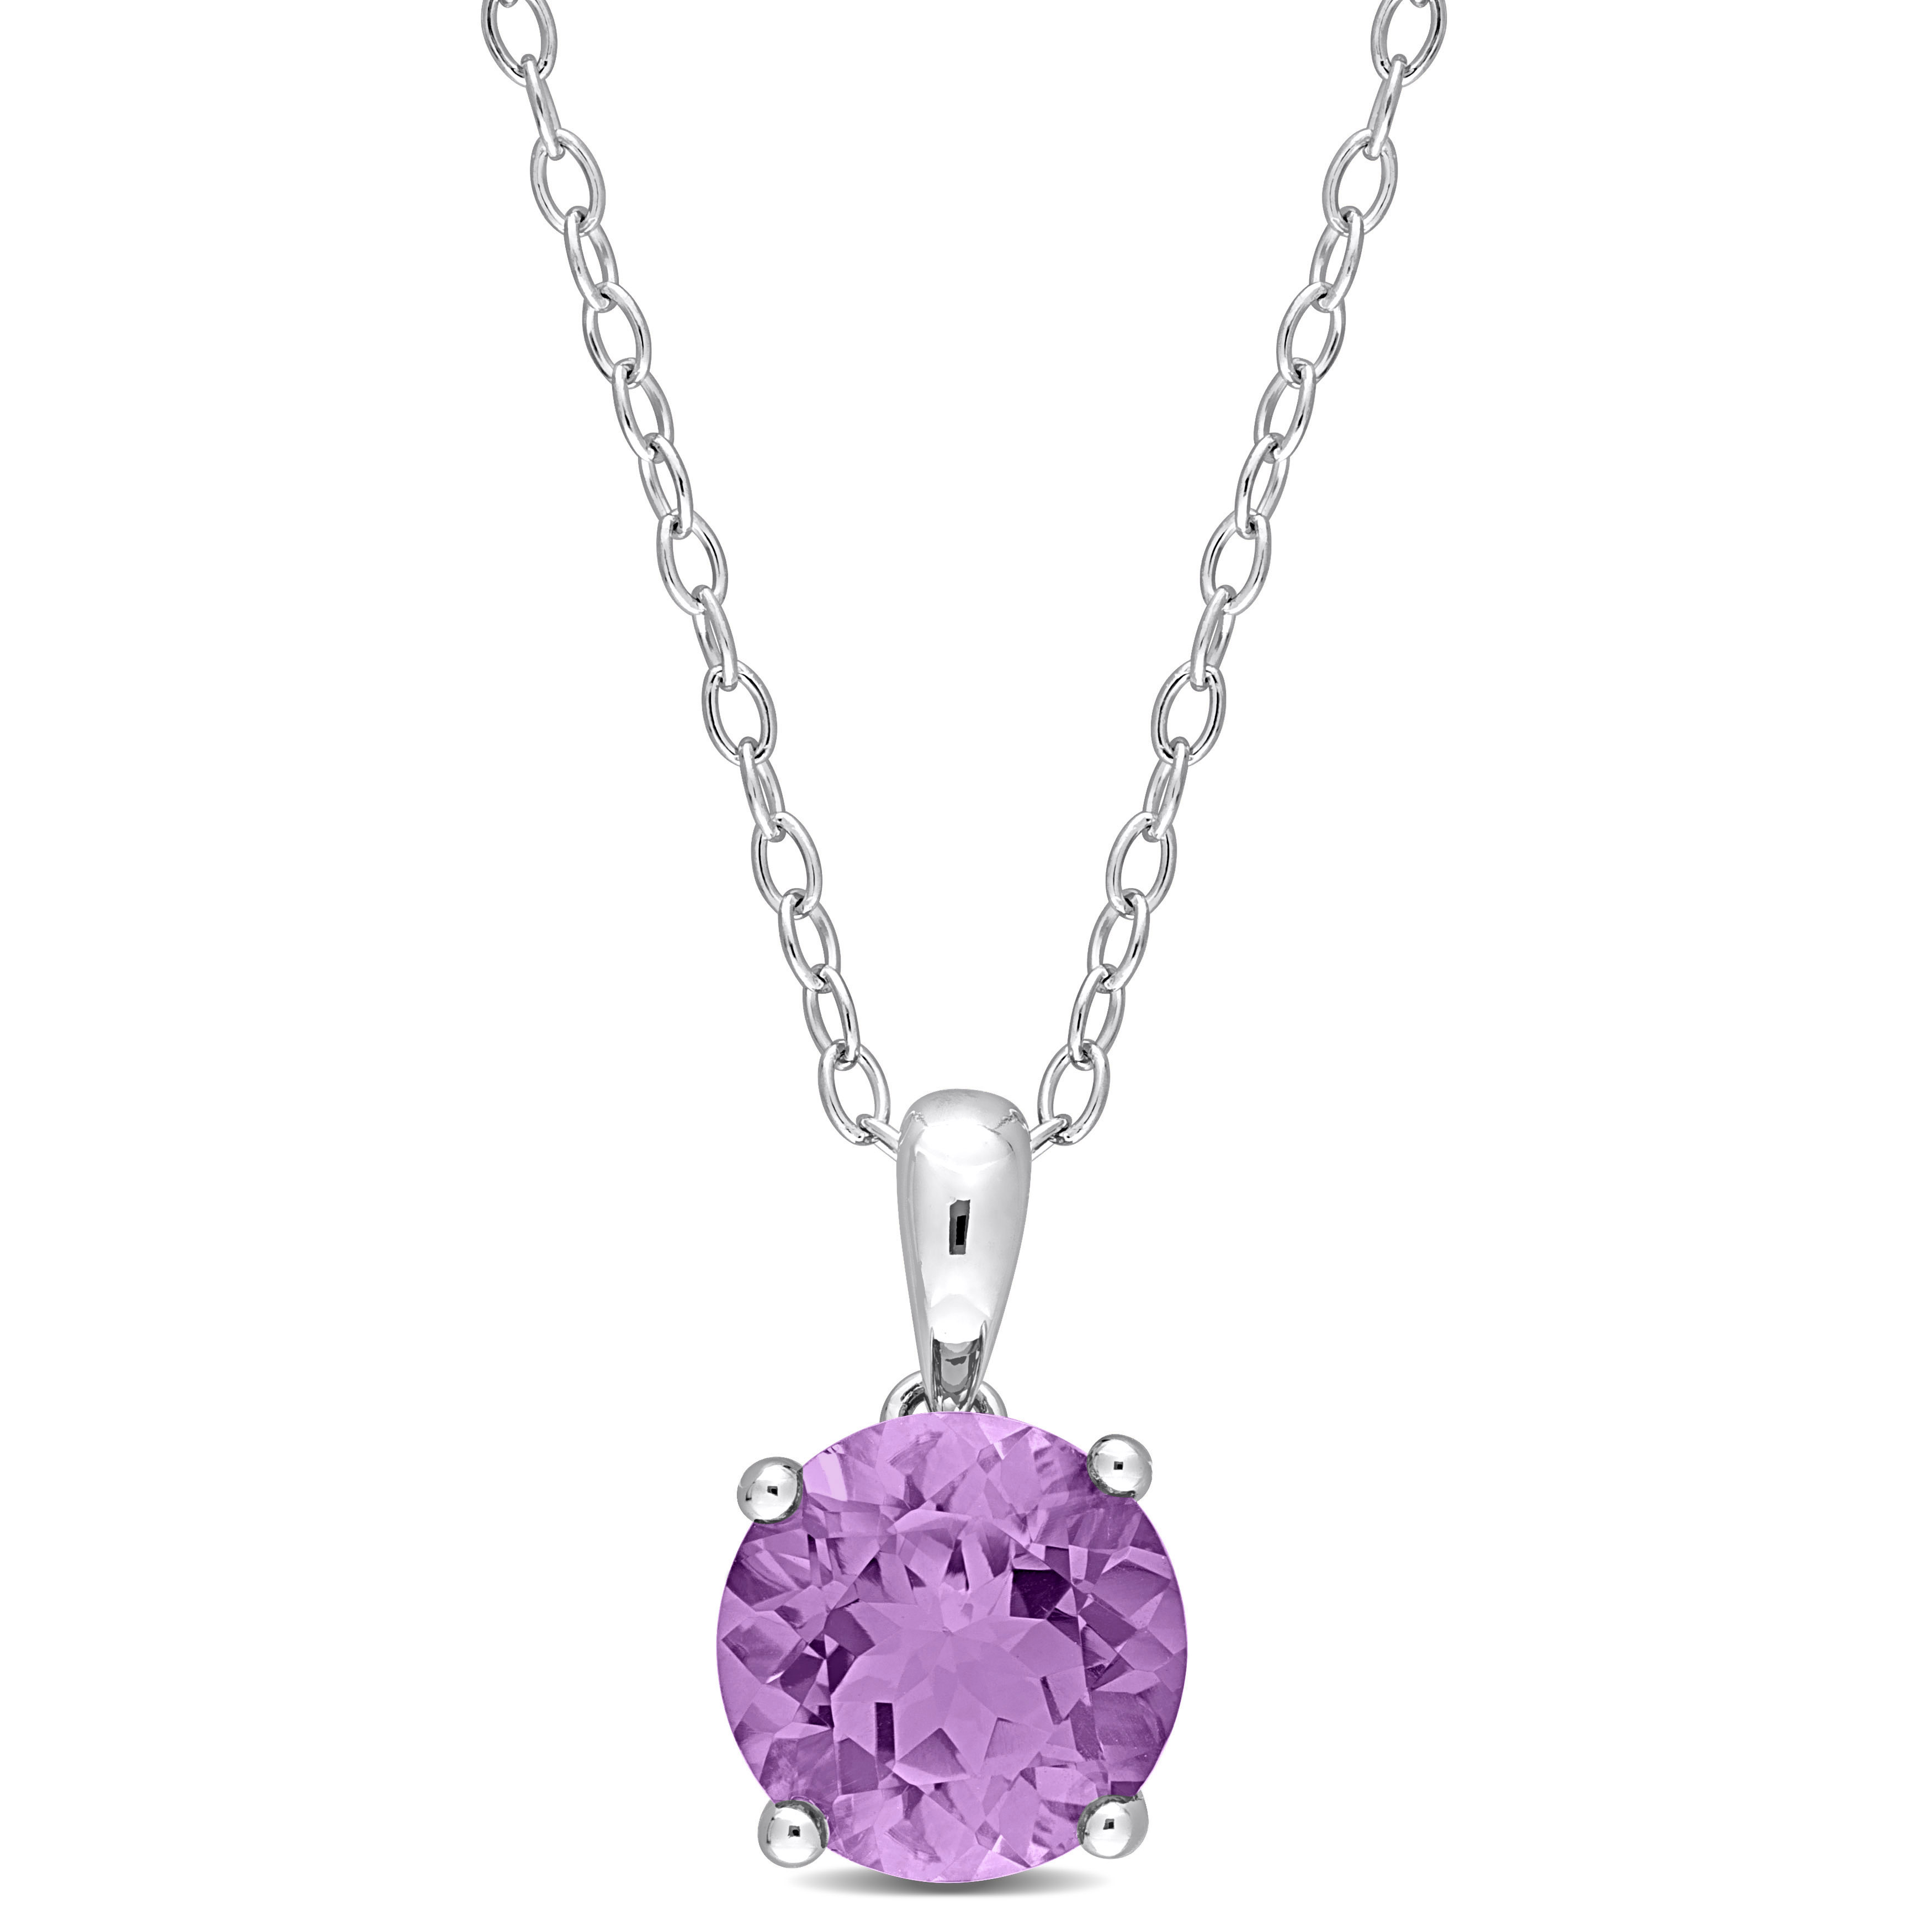 1 1/2 CT TGW Amethyst Solitaire Heart Design Pendant with Chain in Sterling Silver - 18 in.